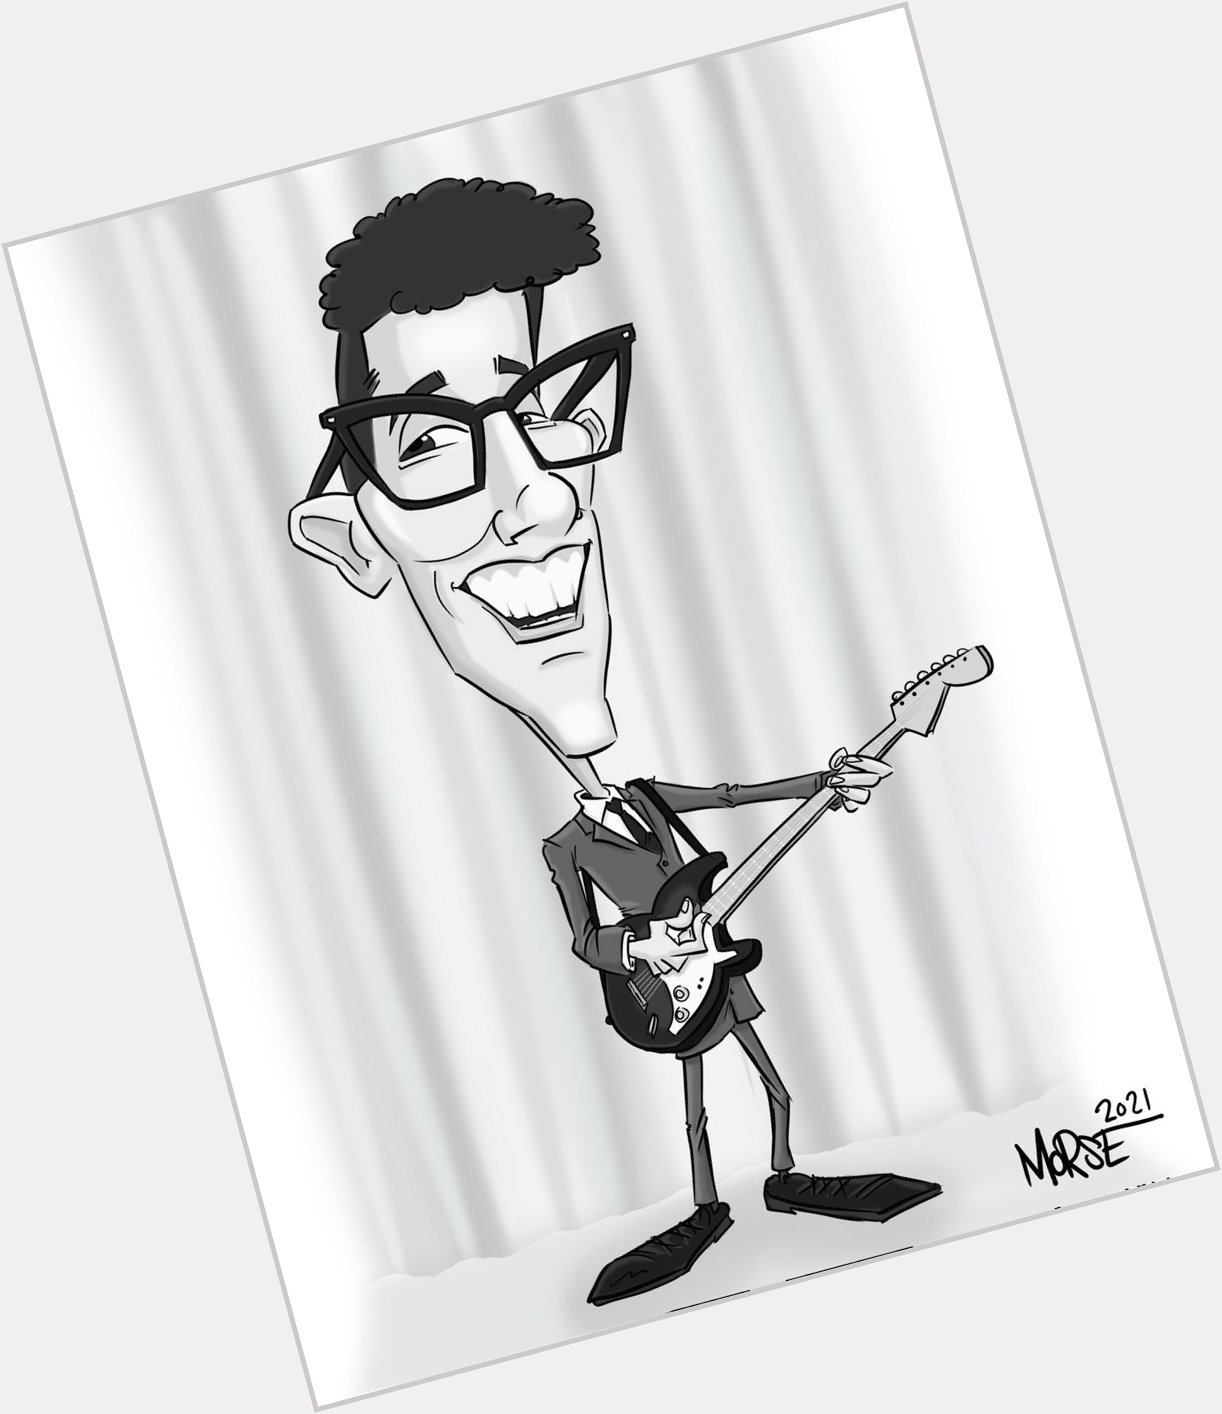 Happy Birthday to Buddy Holly!  Hey Peggy Sue, why not message me about getting a caricature? 